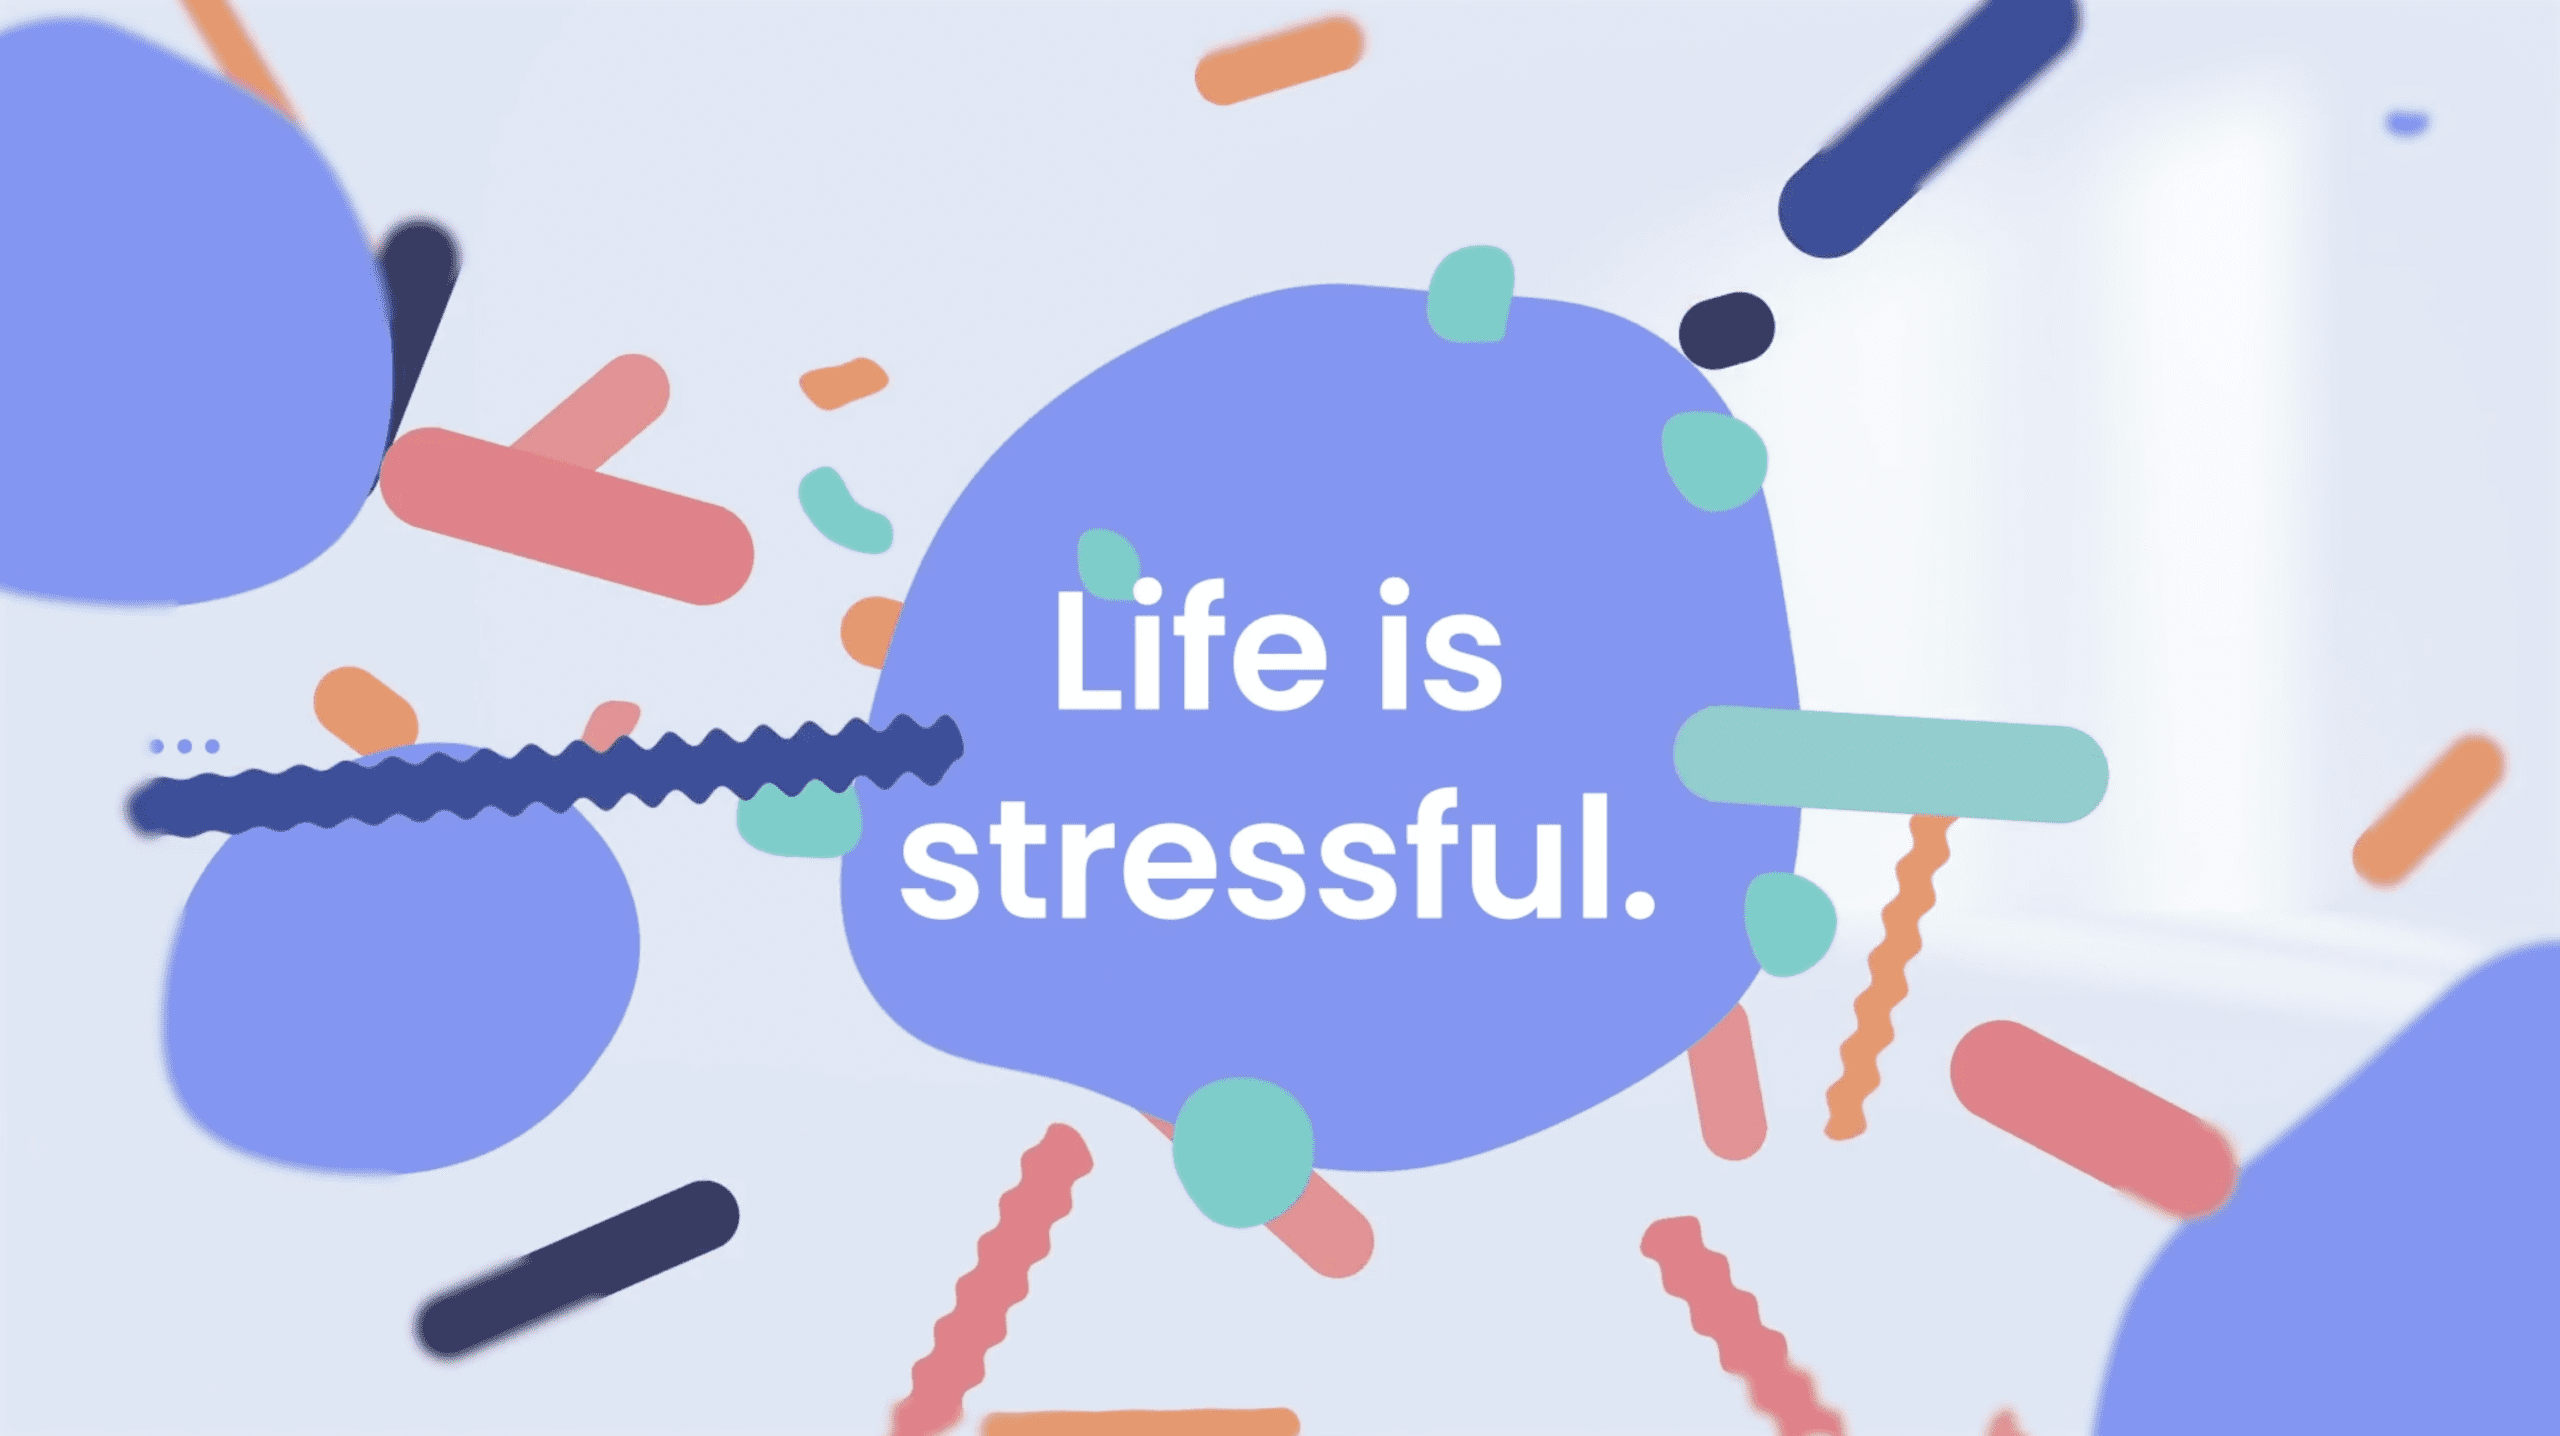 An advertisement depicting the phrase "Life is Stressful" in white text against an abstract background. The background is large four spots surrounded by pink, orange, green, and black squiggles and lines against a white screen.